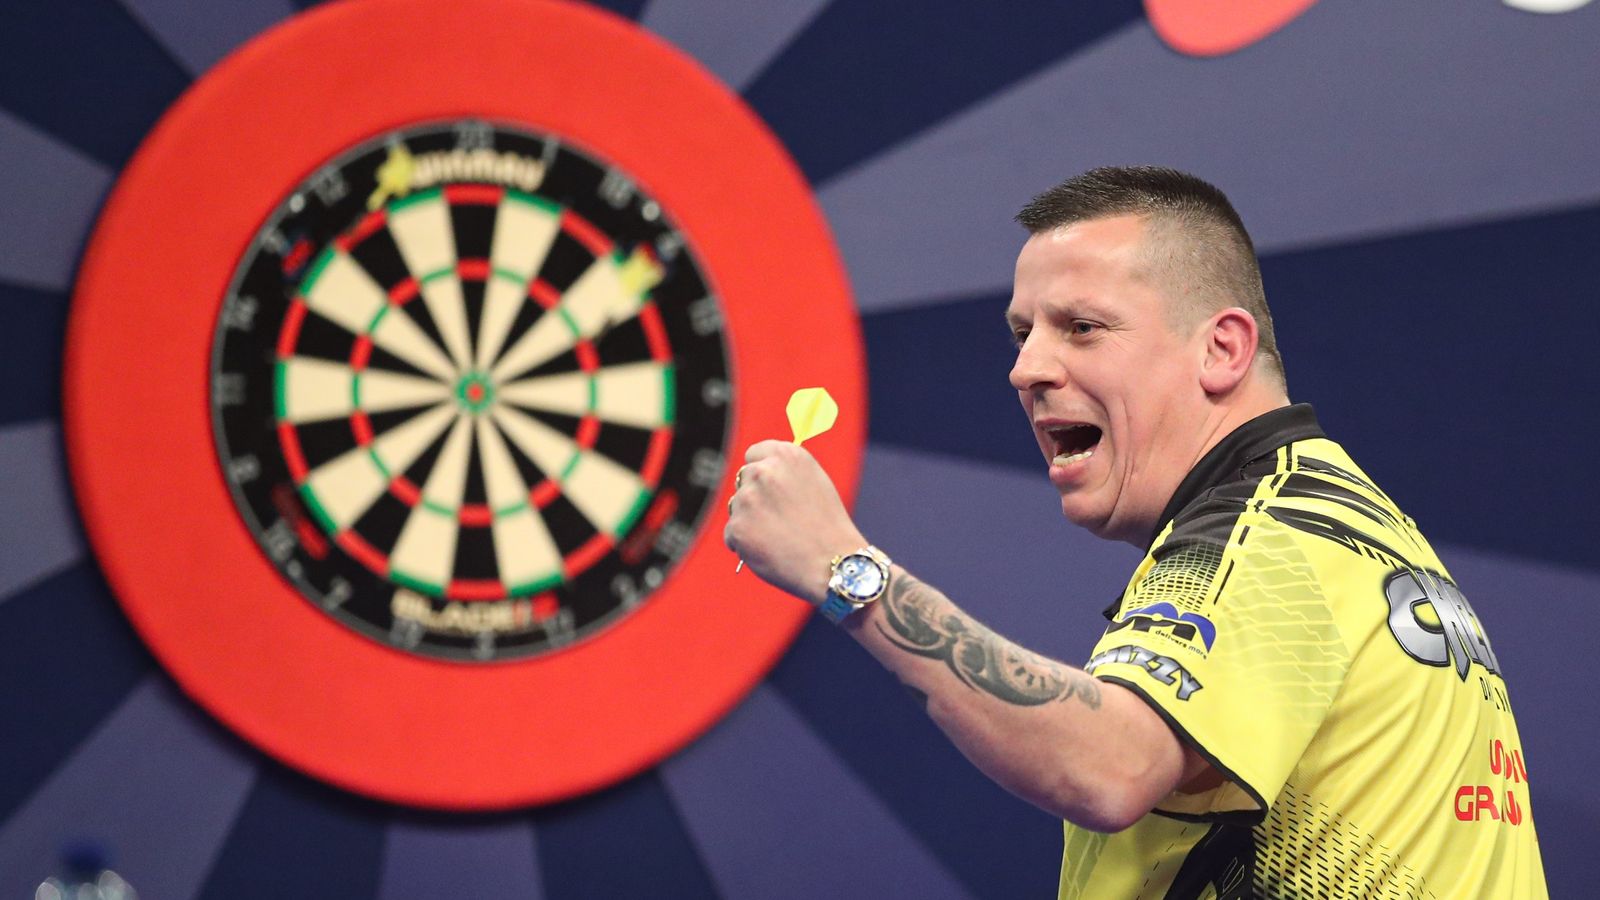 players-championship-darts-dave-chisnall-defies-rookie-josh-rock-to-claim-title-or